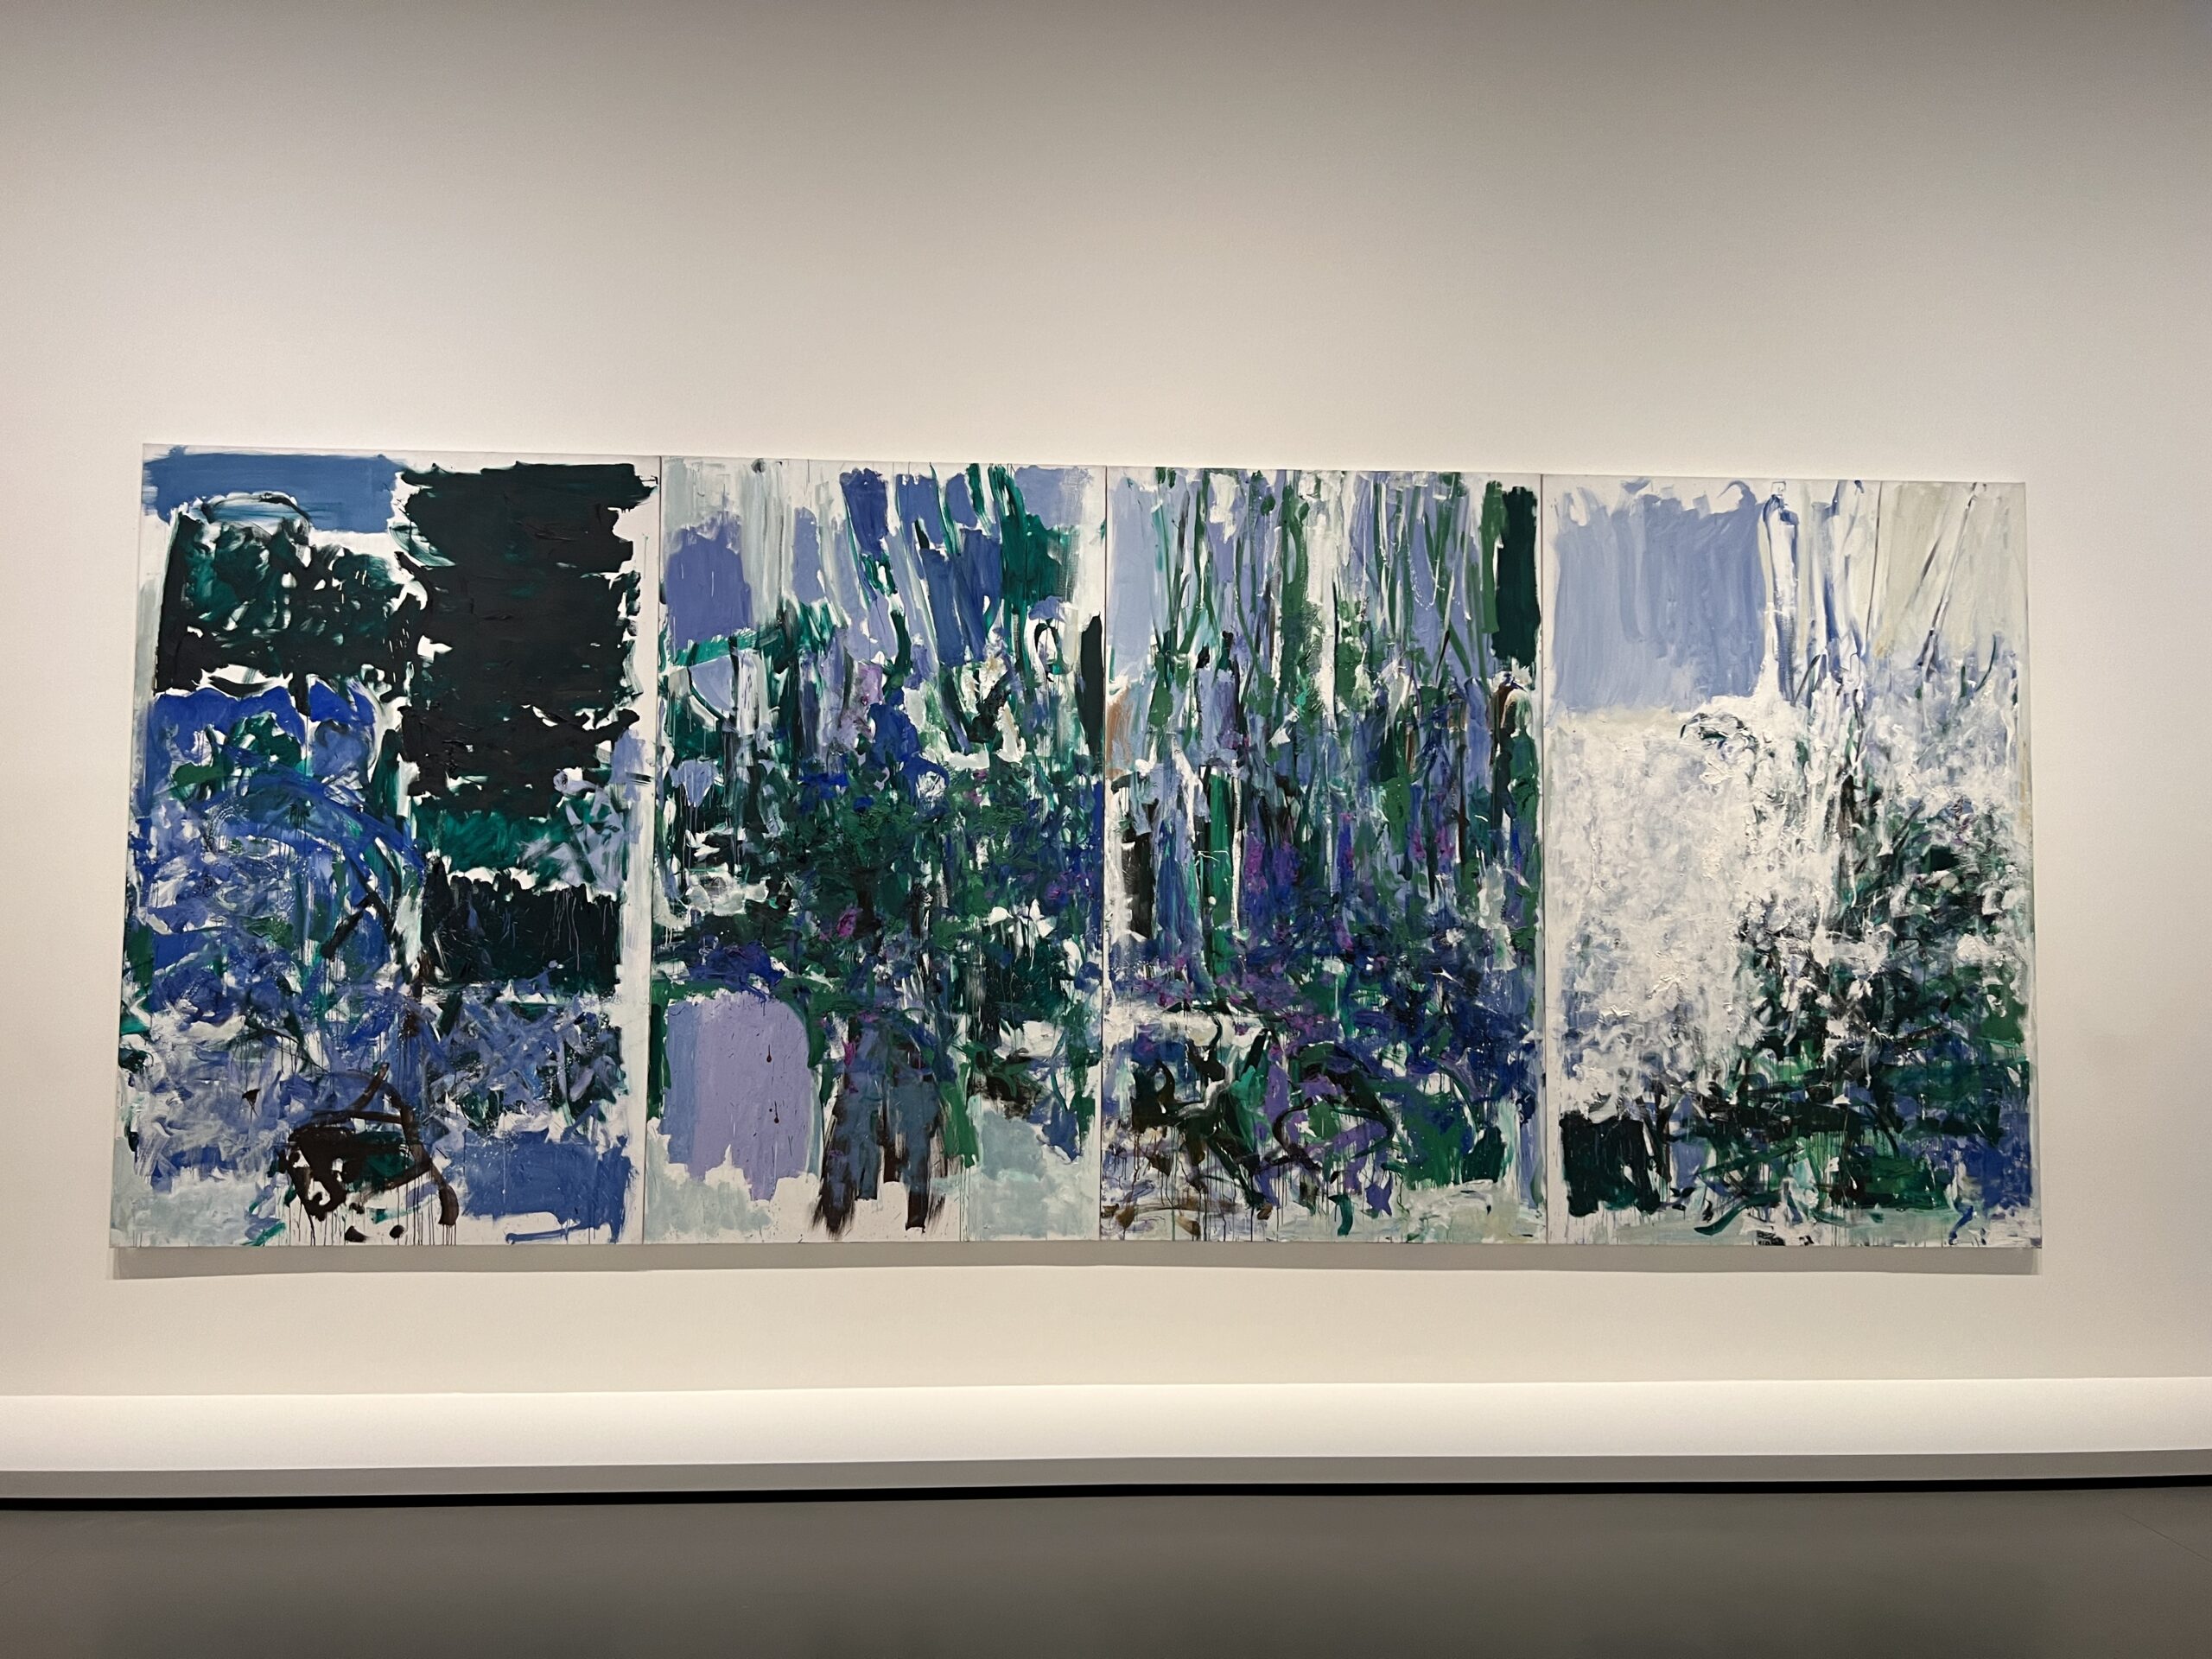 Joan Mitchell Foundation Alleges Louis Vuitton Used Art Without Permit – WWD